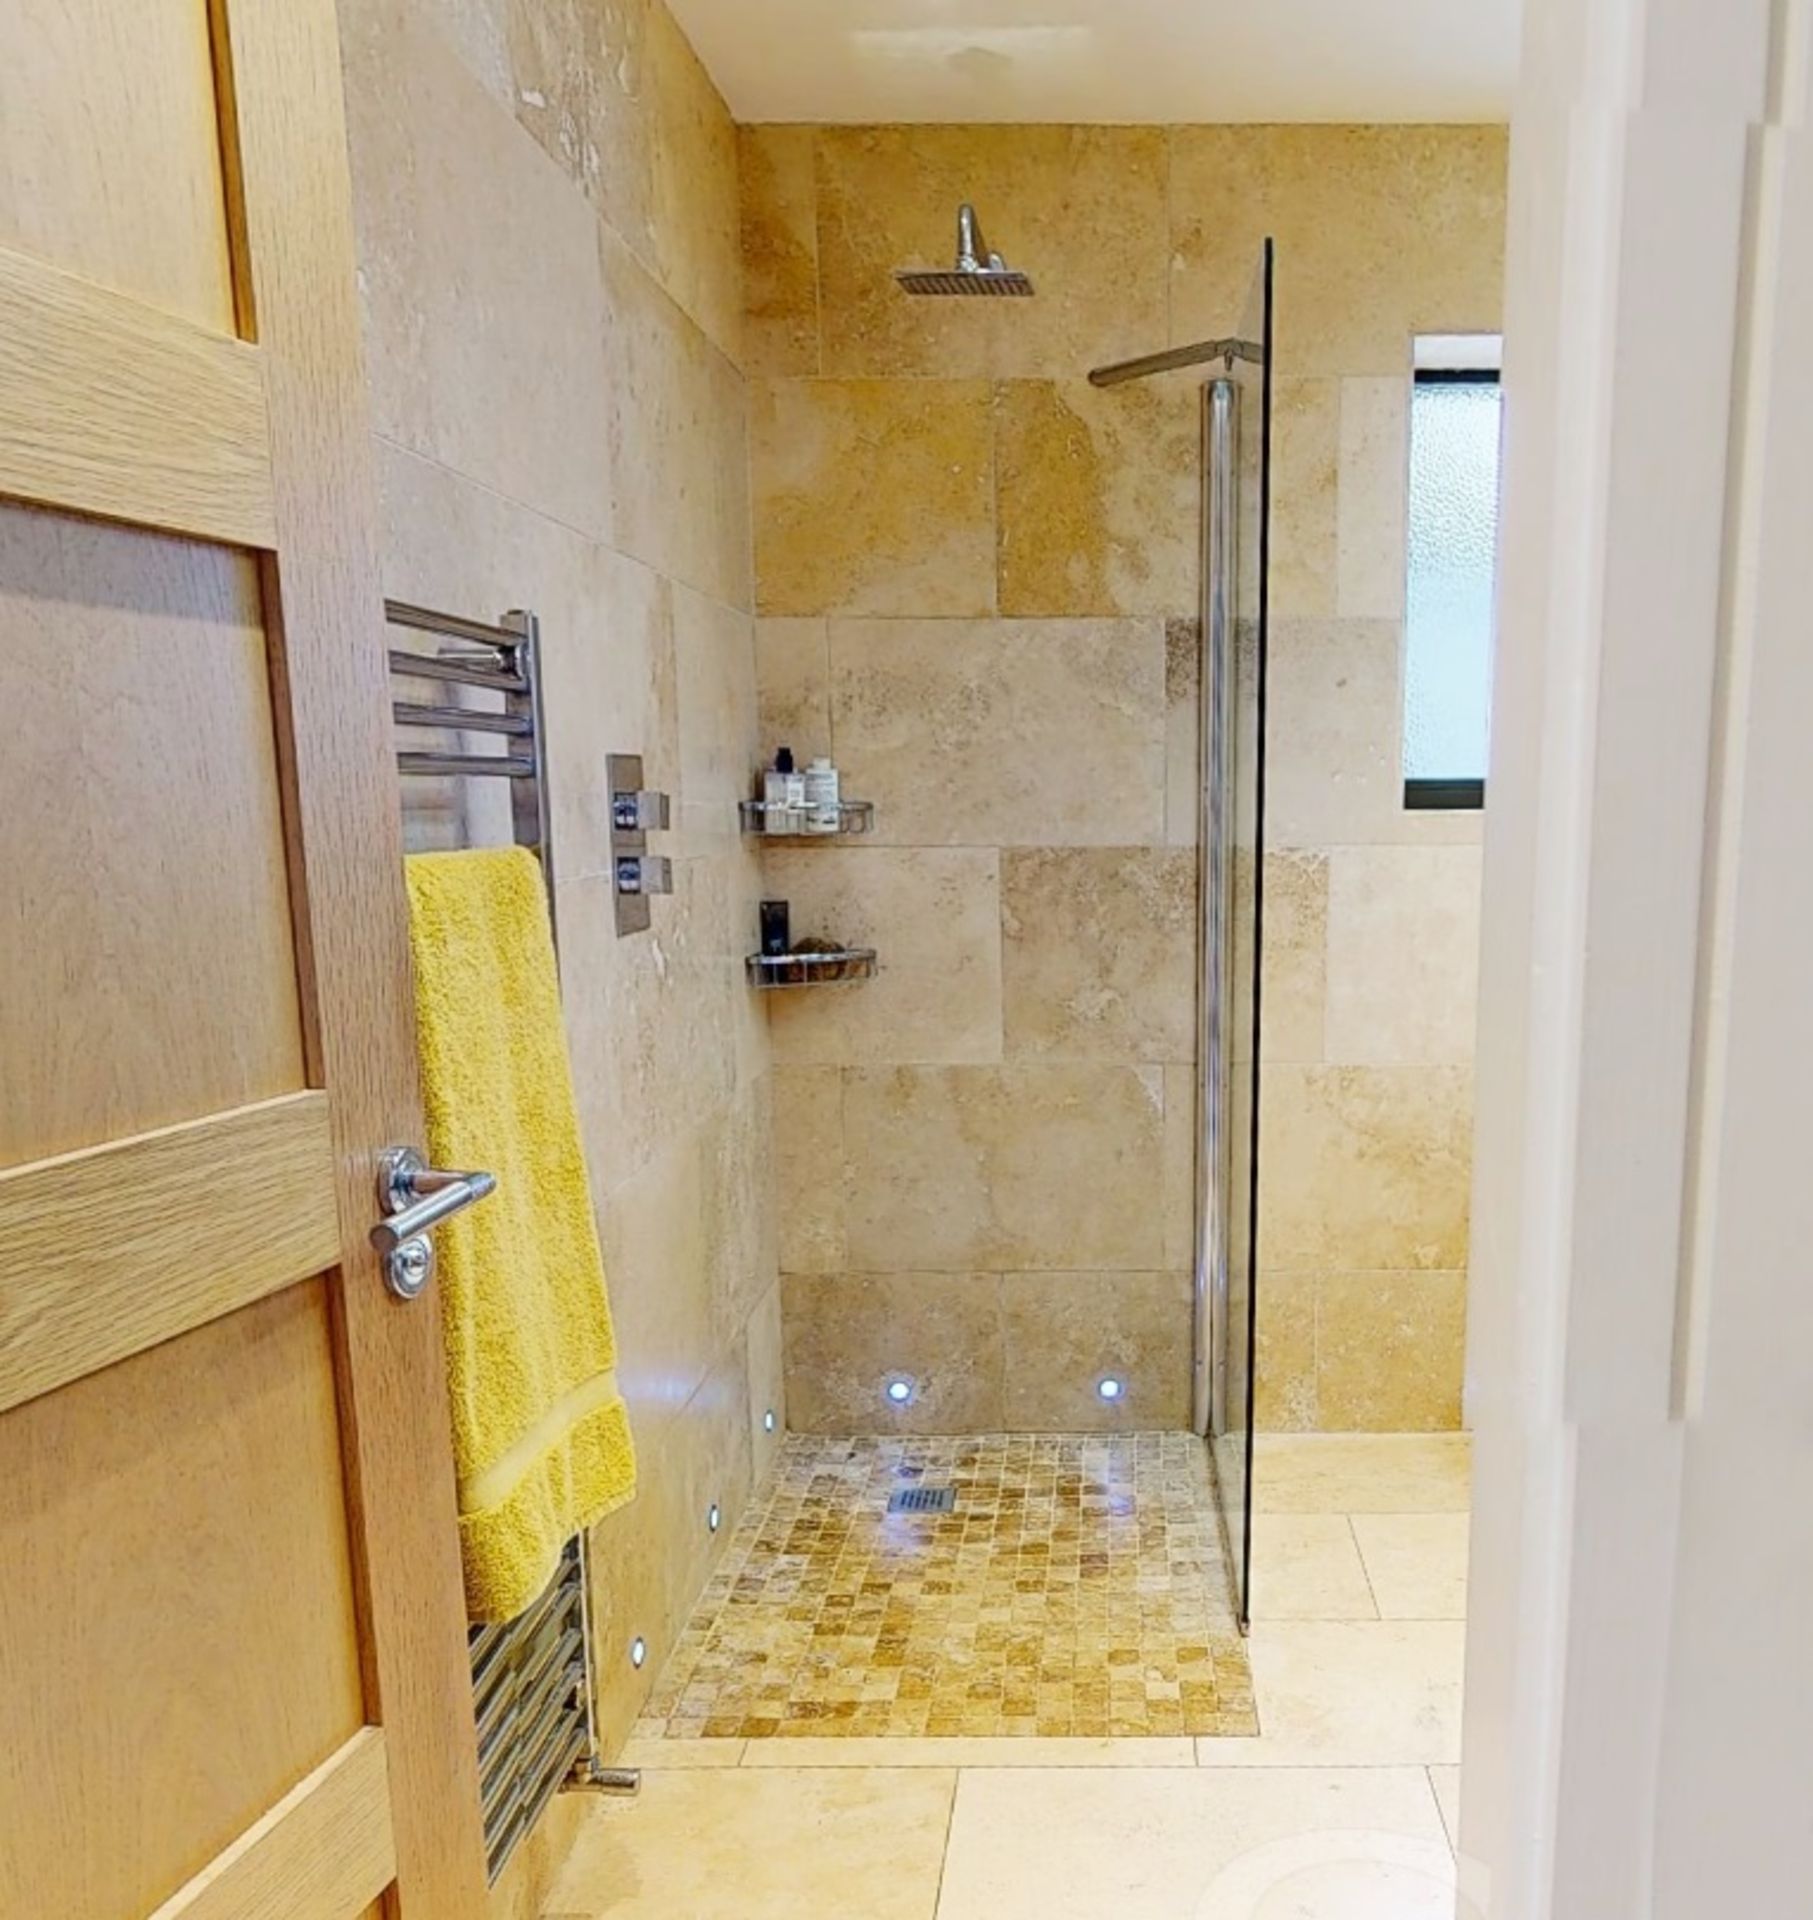 Contents Of A Luxury En-suite Bathroom With Shower - Ref: MAIN/BTH - CL775 - NO VAT ON THE HAMMER - Image 6 of 7